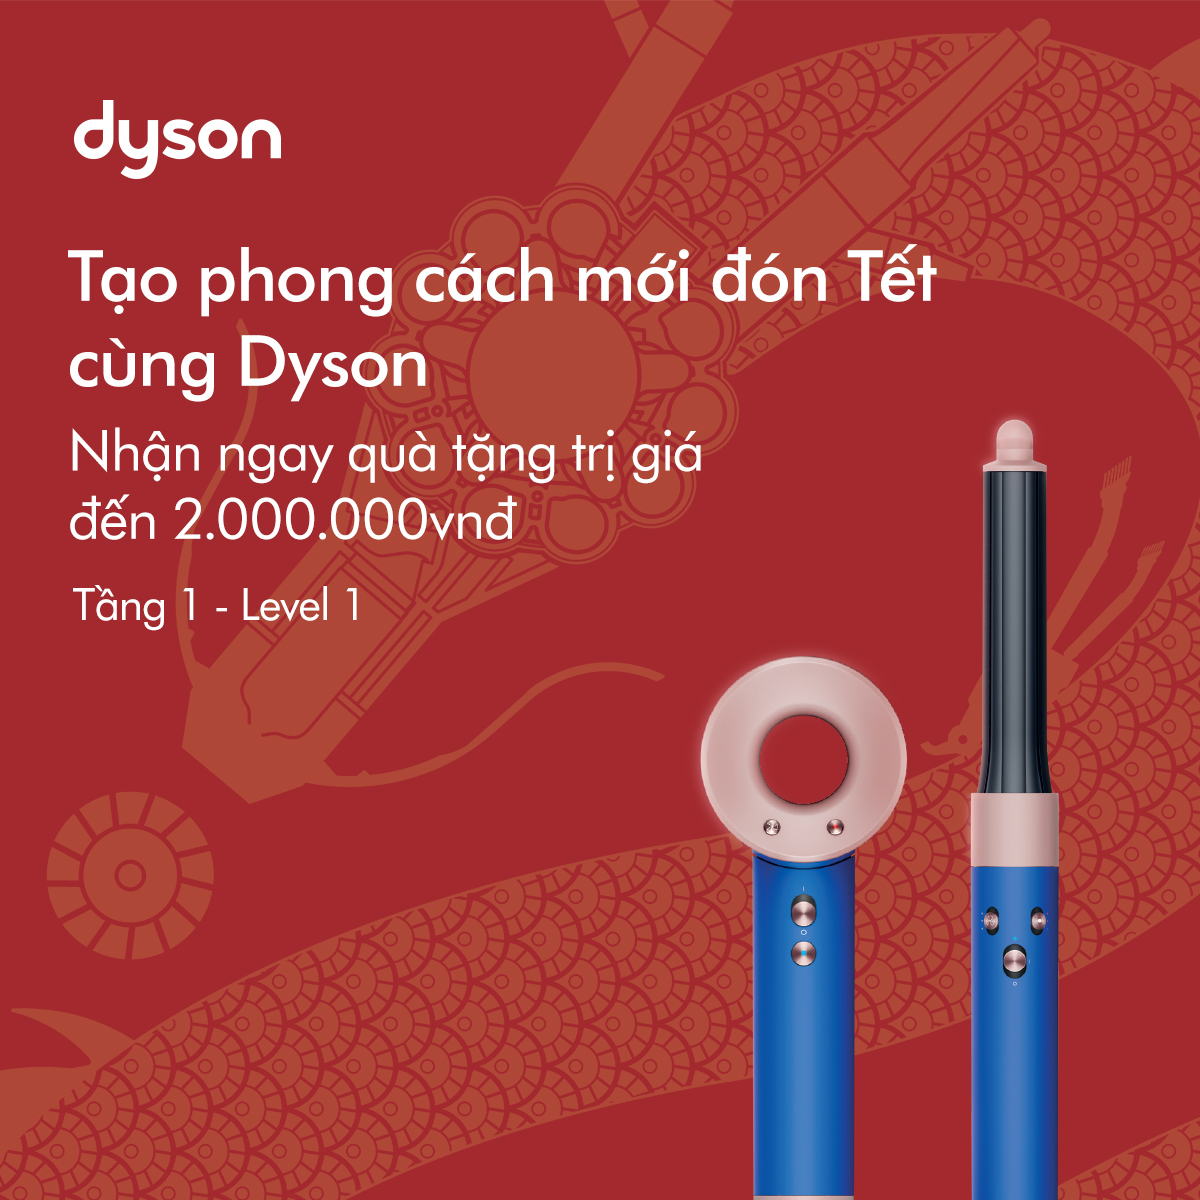 🎁 RECEIVE A DELIGHTFUL 2,000,000 VND GIFT - EMBRACE THE ART OF STYLING WITH DYSON 🎁